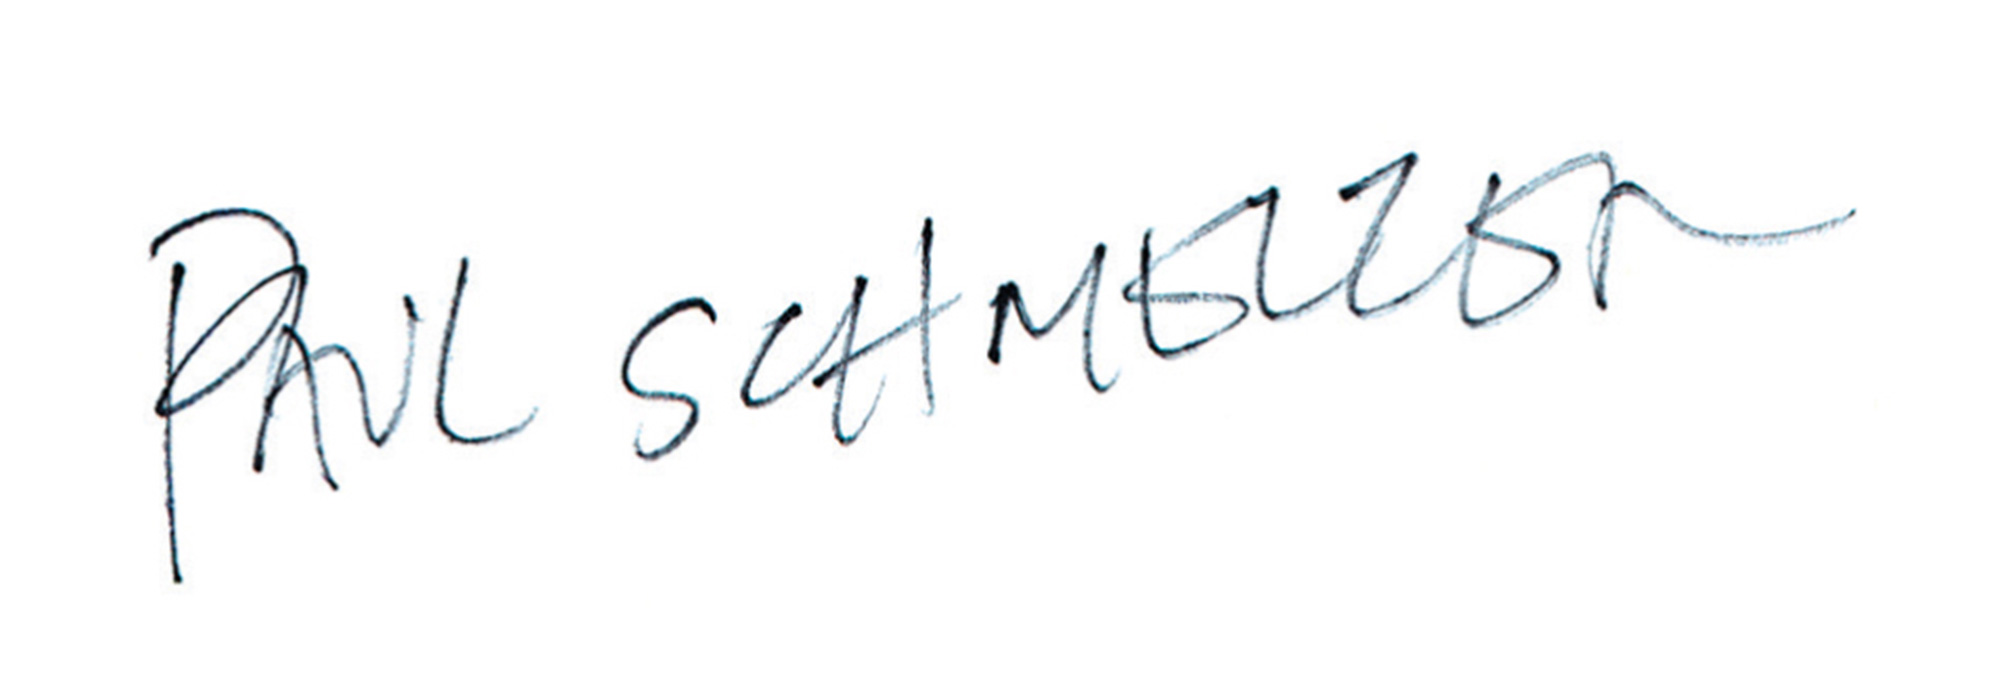 A photograph of Frank Gehry's written version of the name Paul Schmelzer.